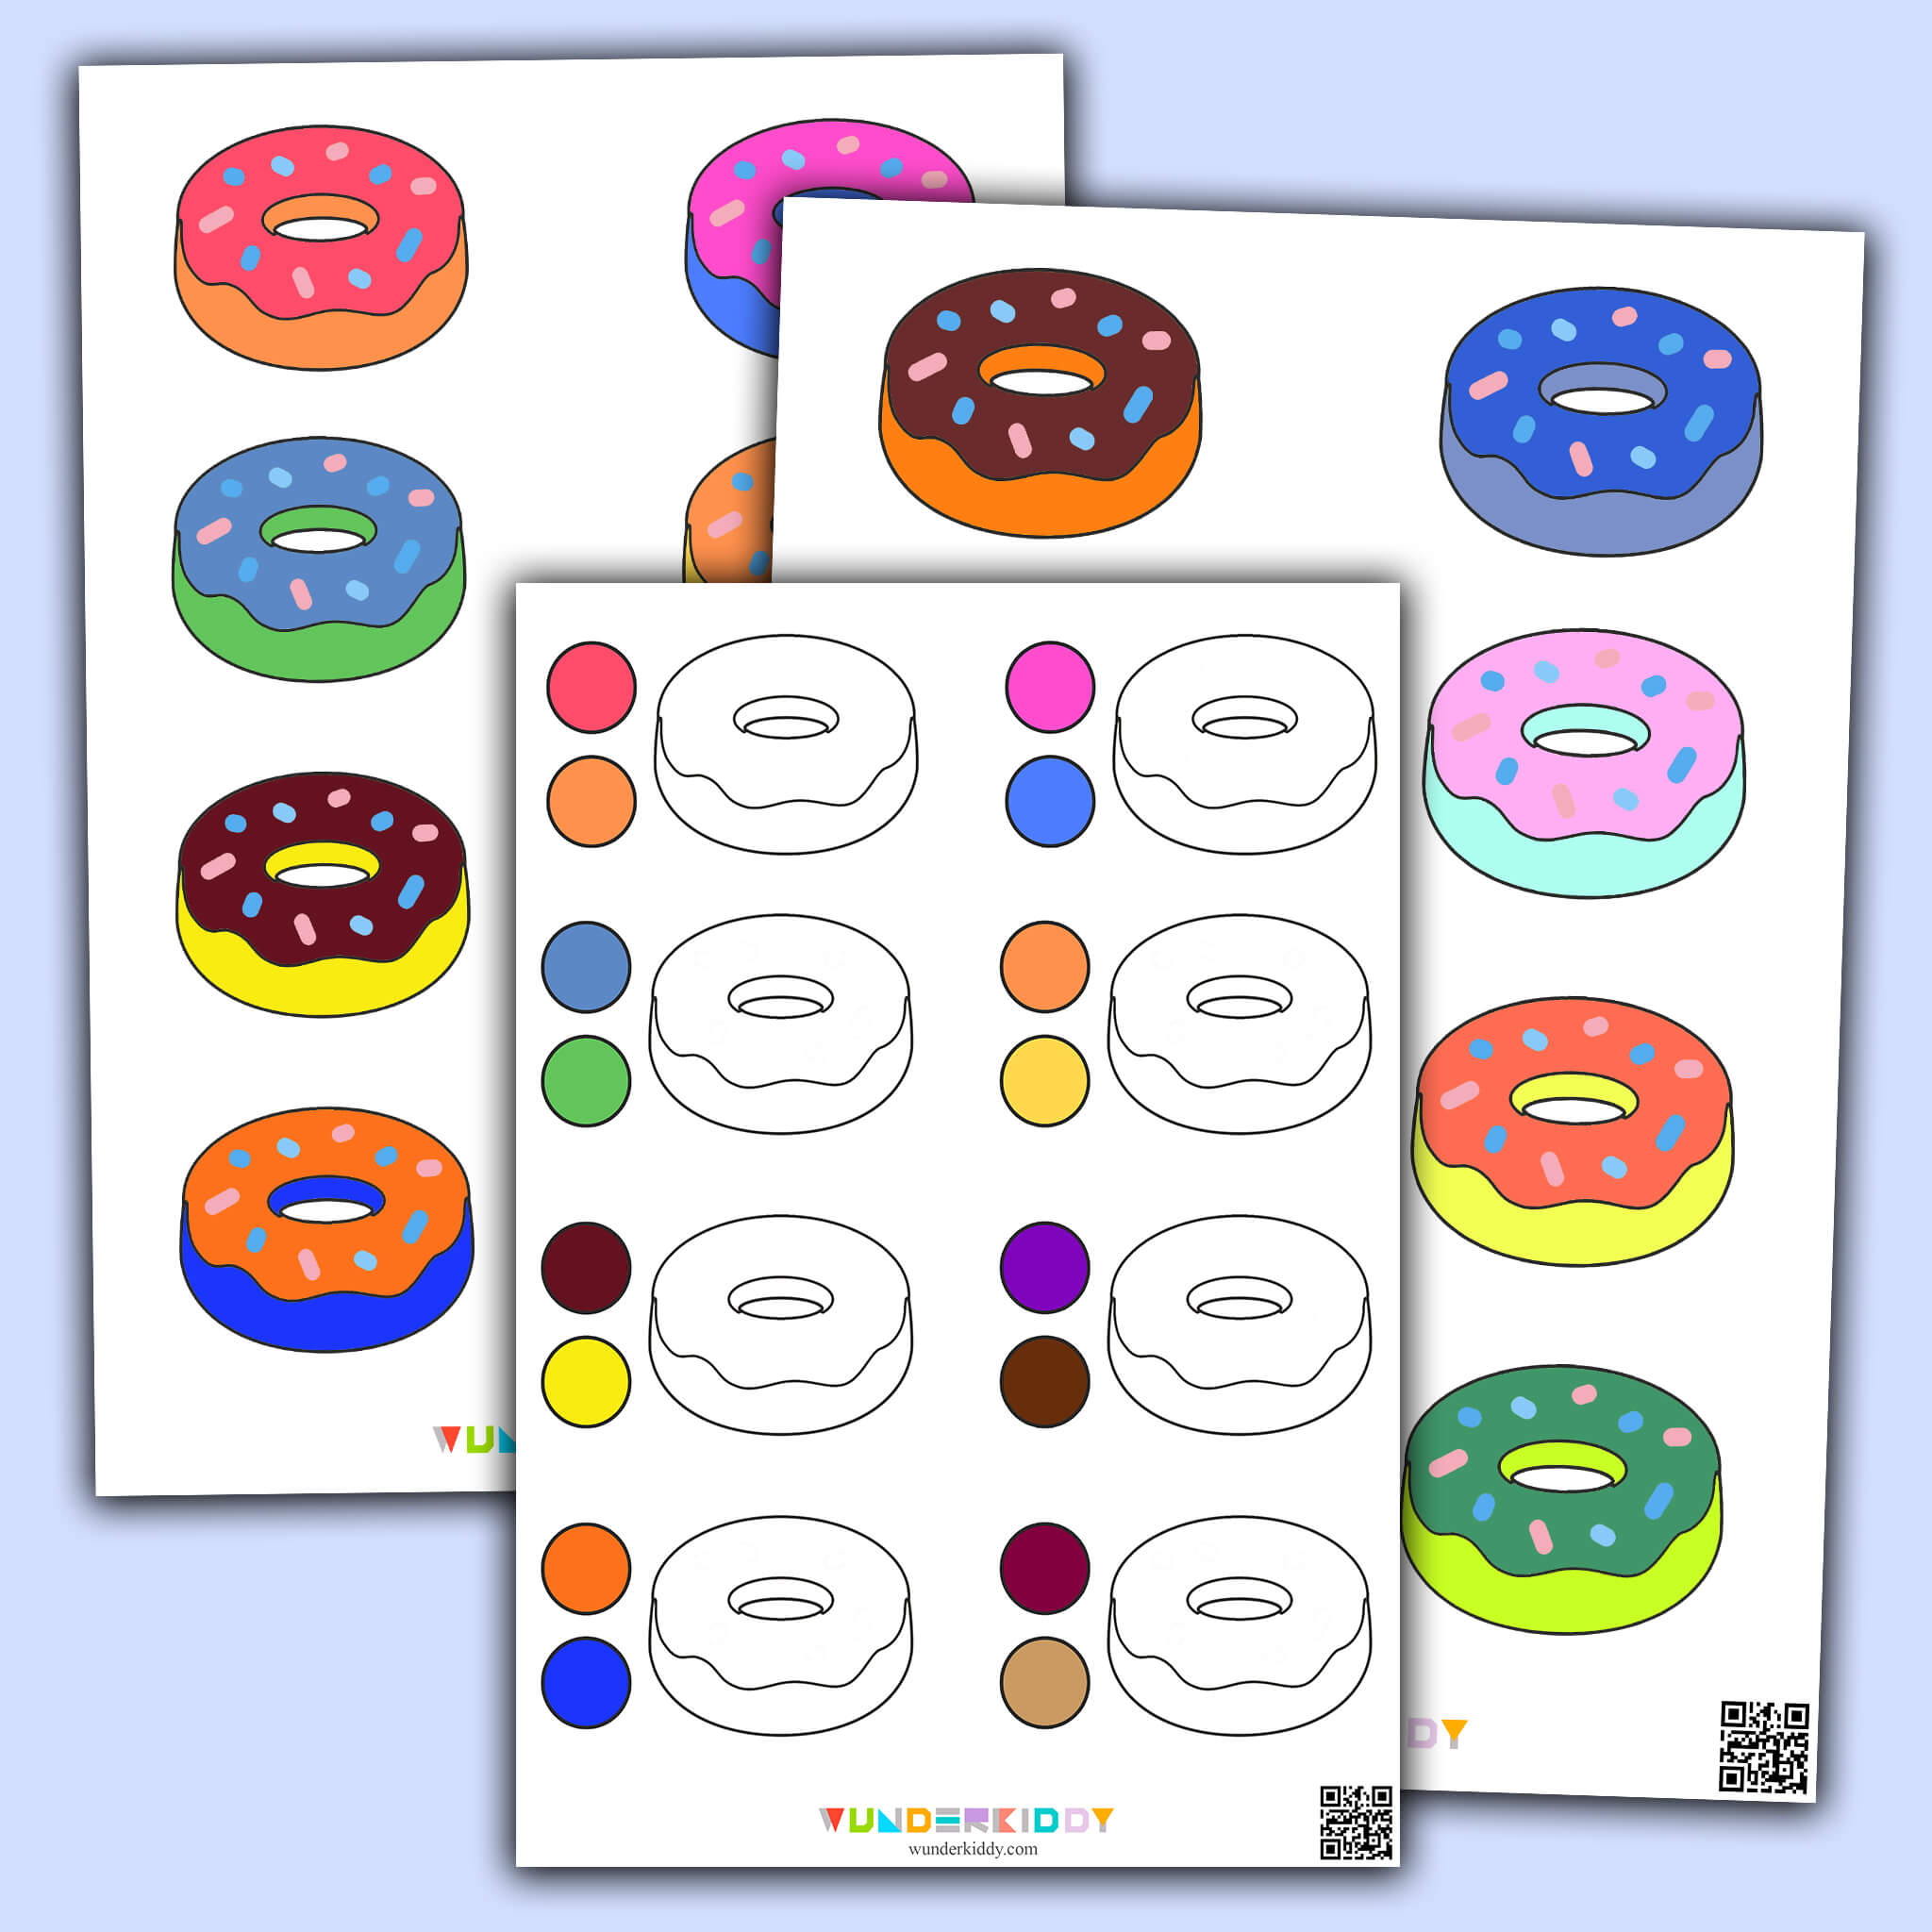 Printable Colored Donuts Color Match Activity For Children